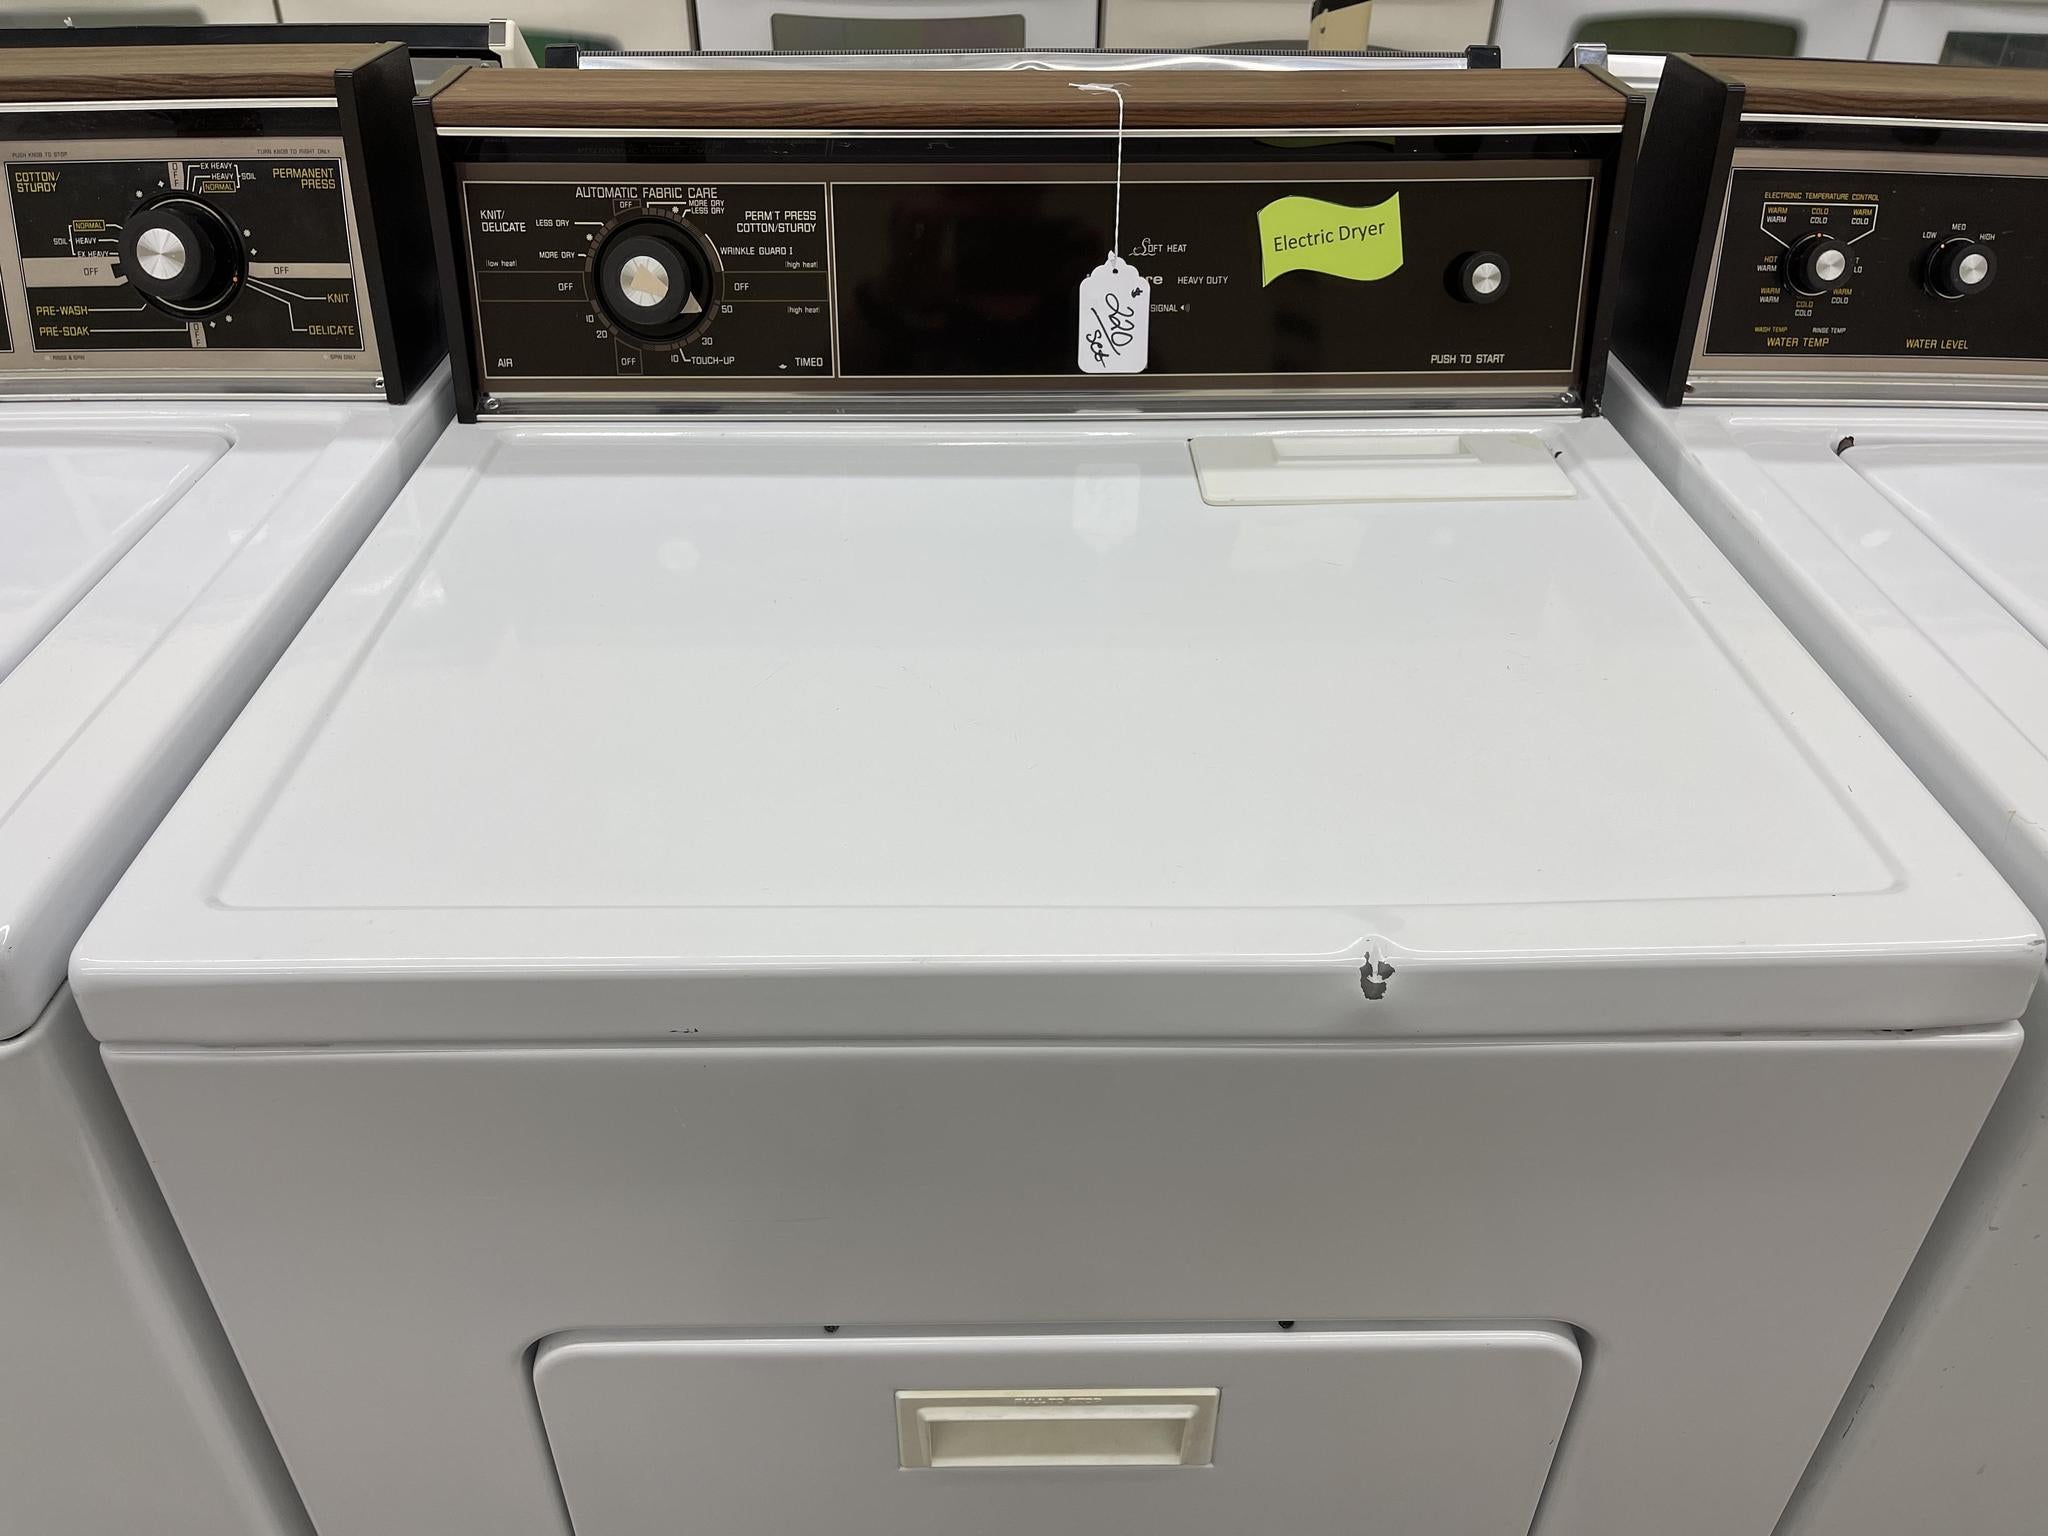 Kenmore washer and dryer from 1970s (museum